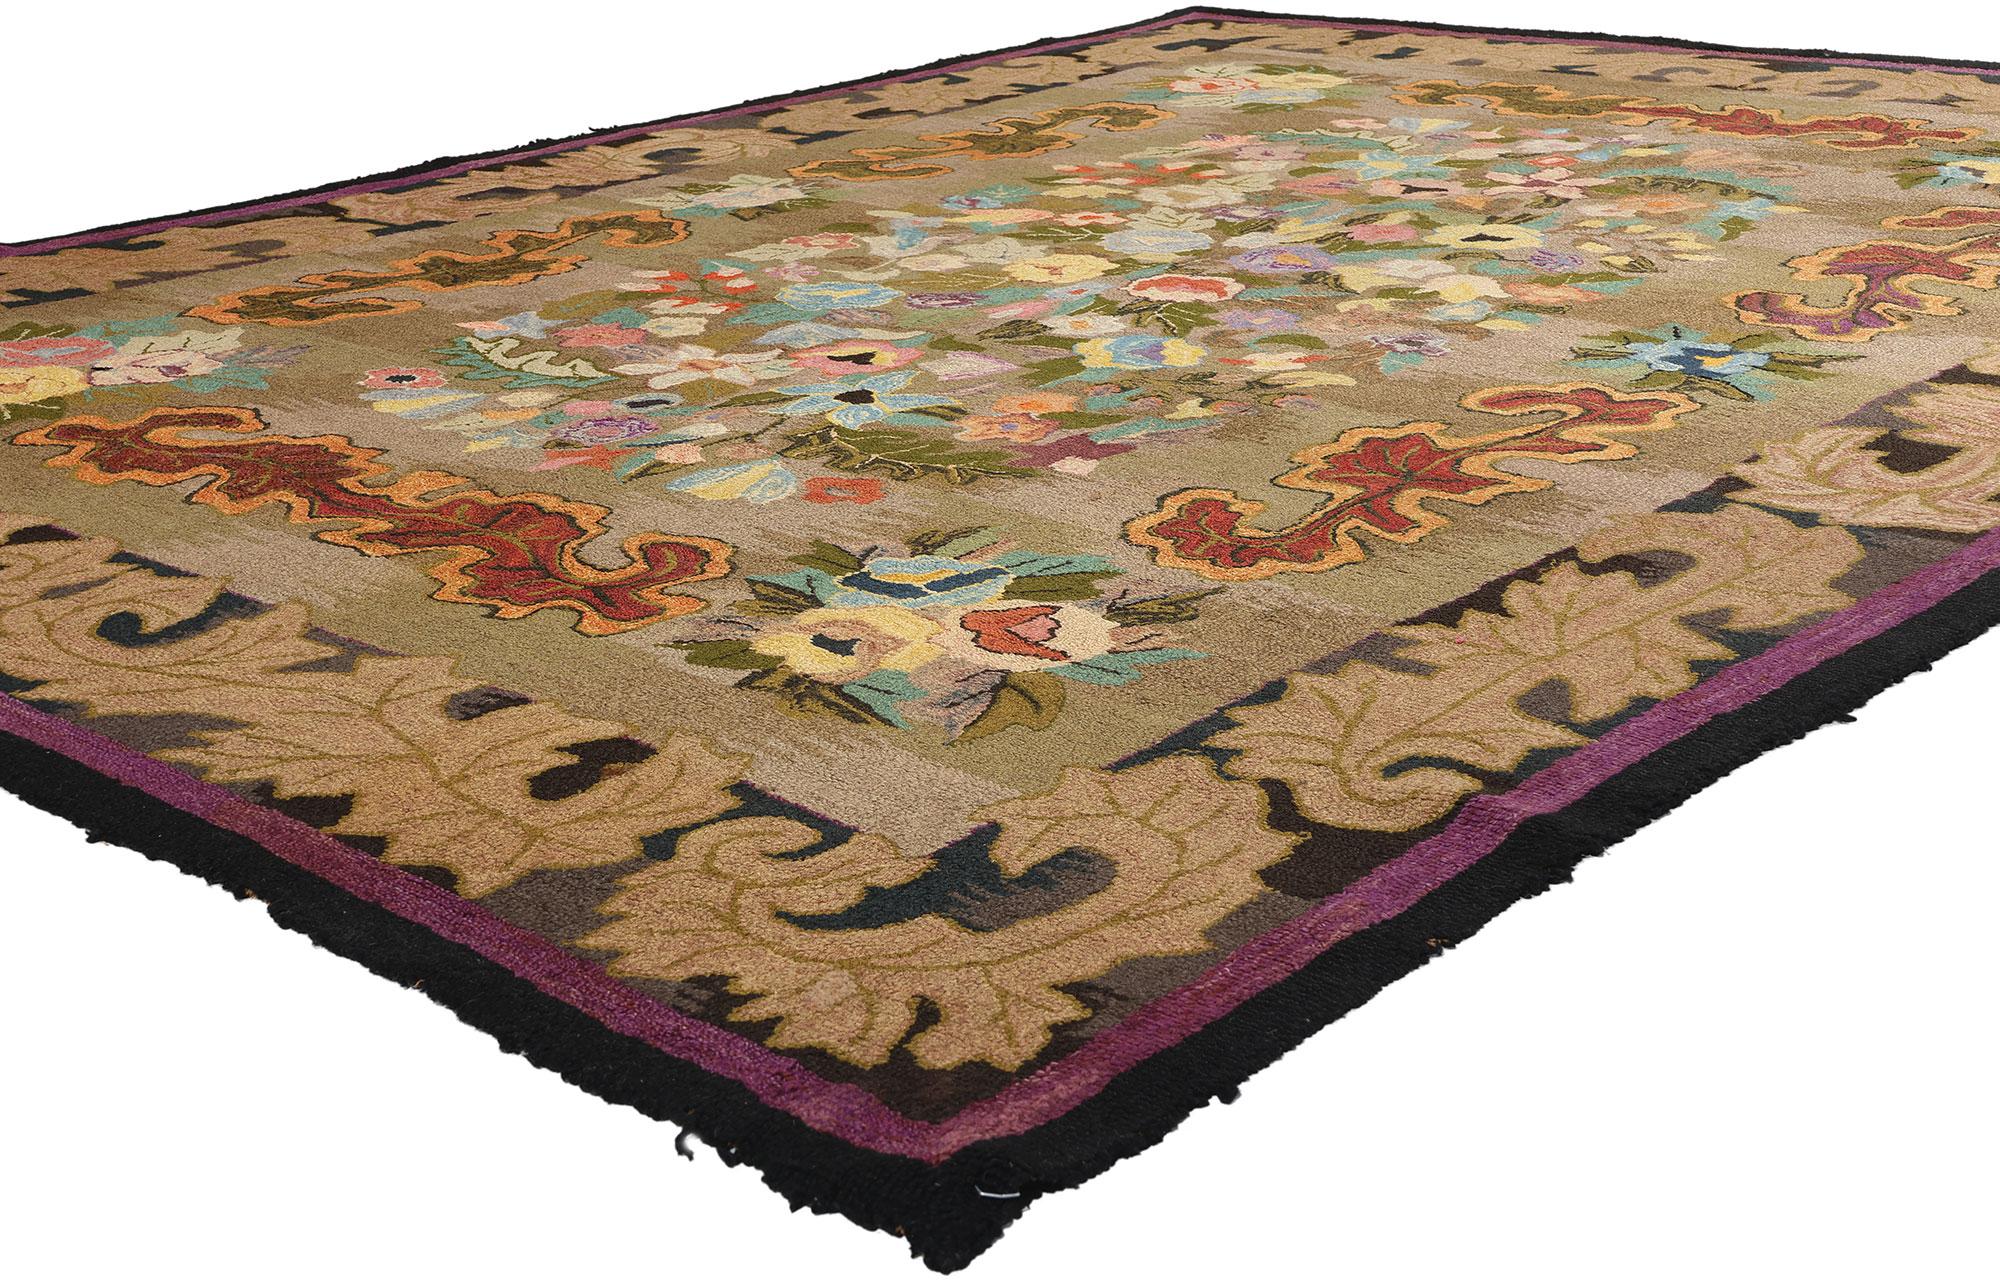 74176 Antique American Floral Hooked Rug, 08’09 x 11’10. An American hooked rug, crafted through the traditional technique of rug hooking, involves pulling loops of yarn or fabric through a base material like burlap or linen to create a textured